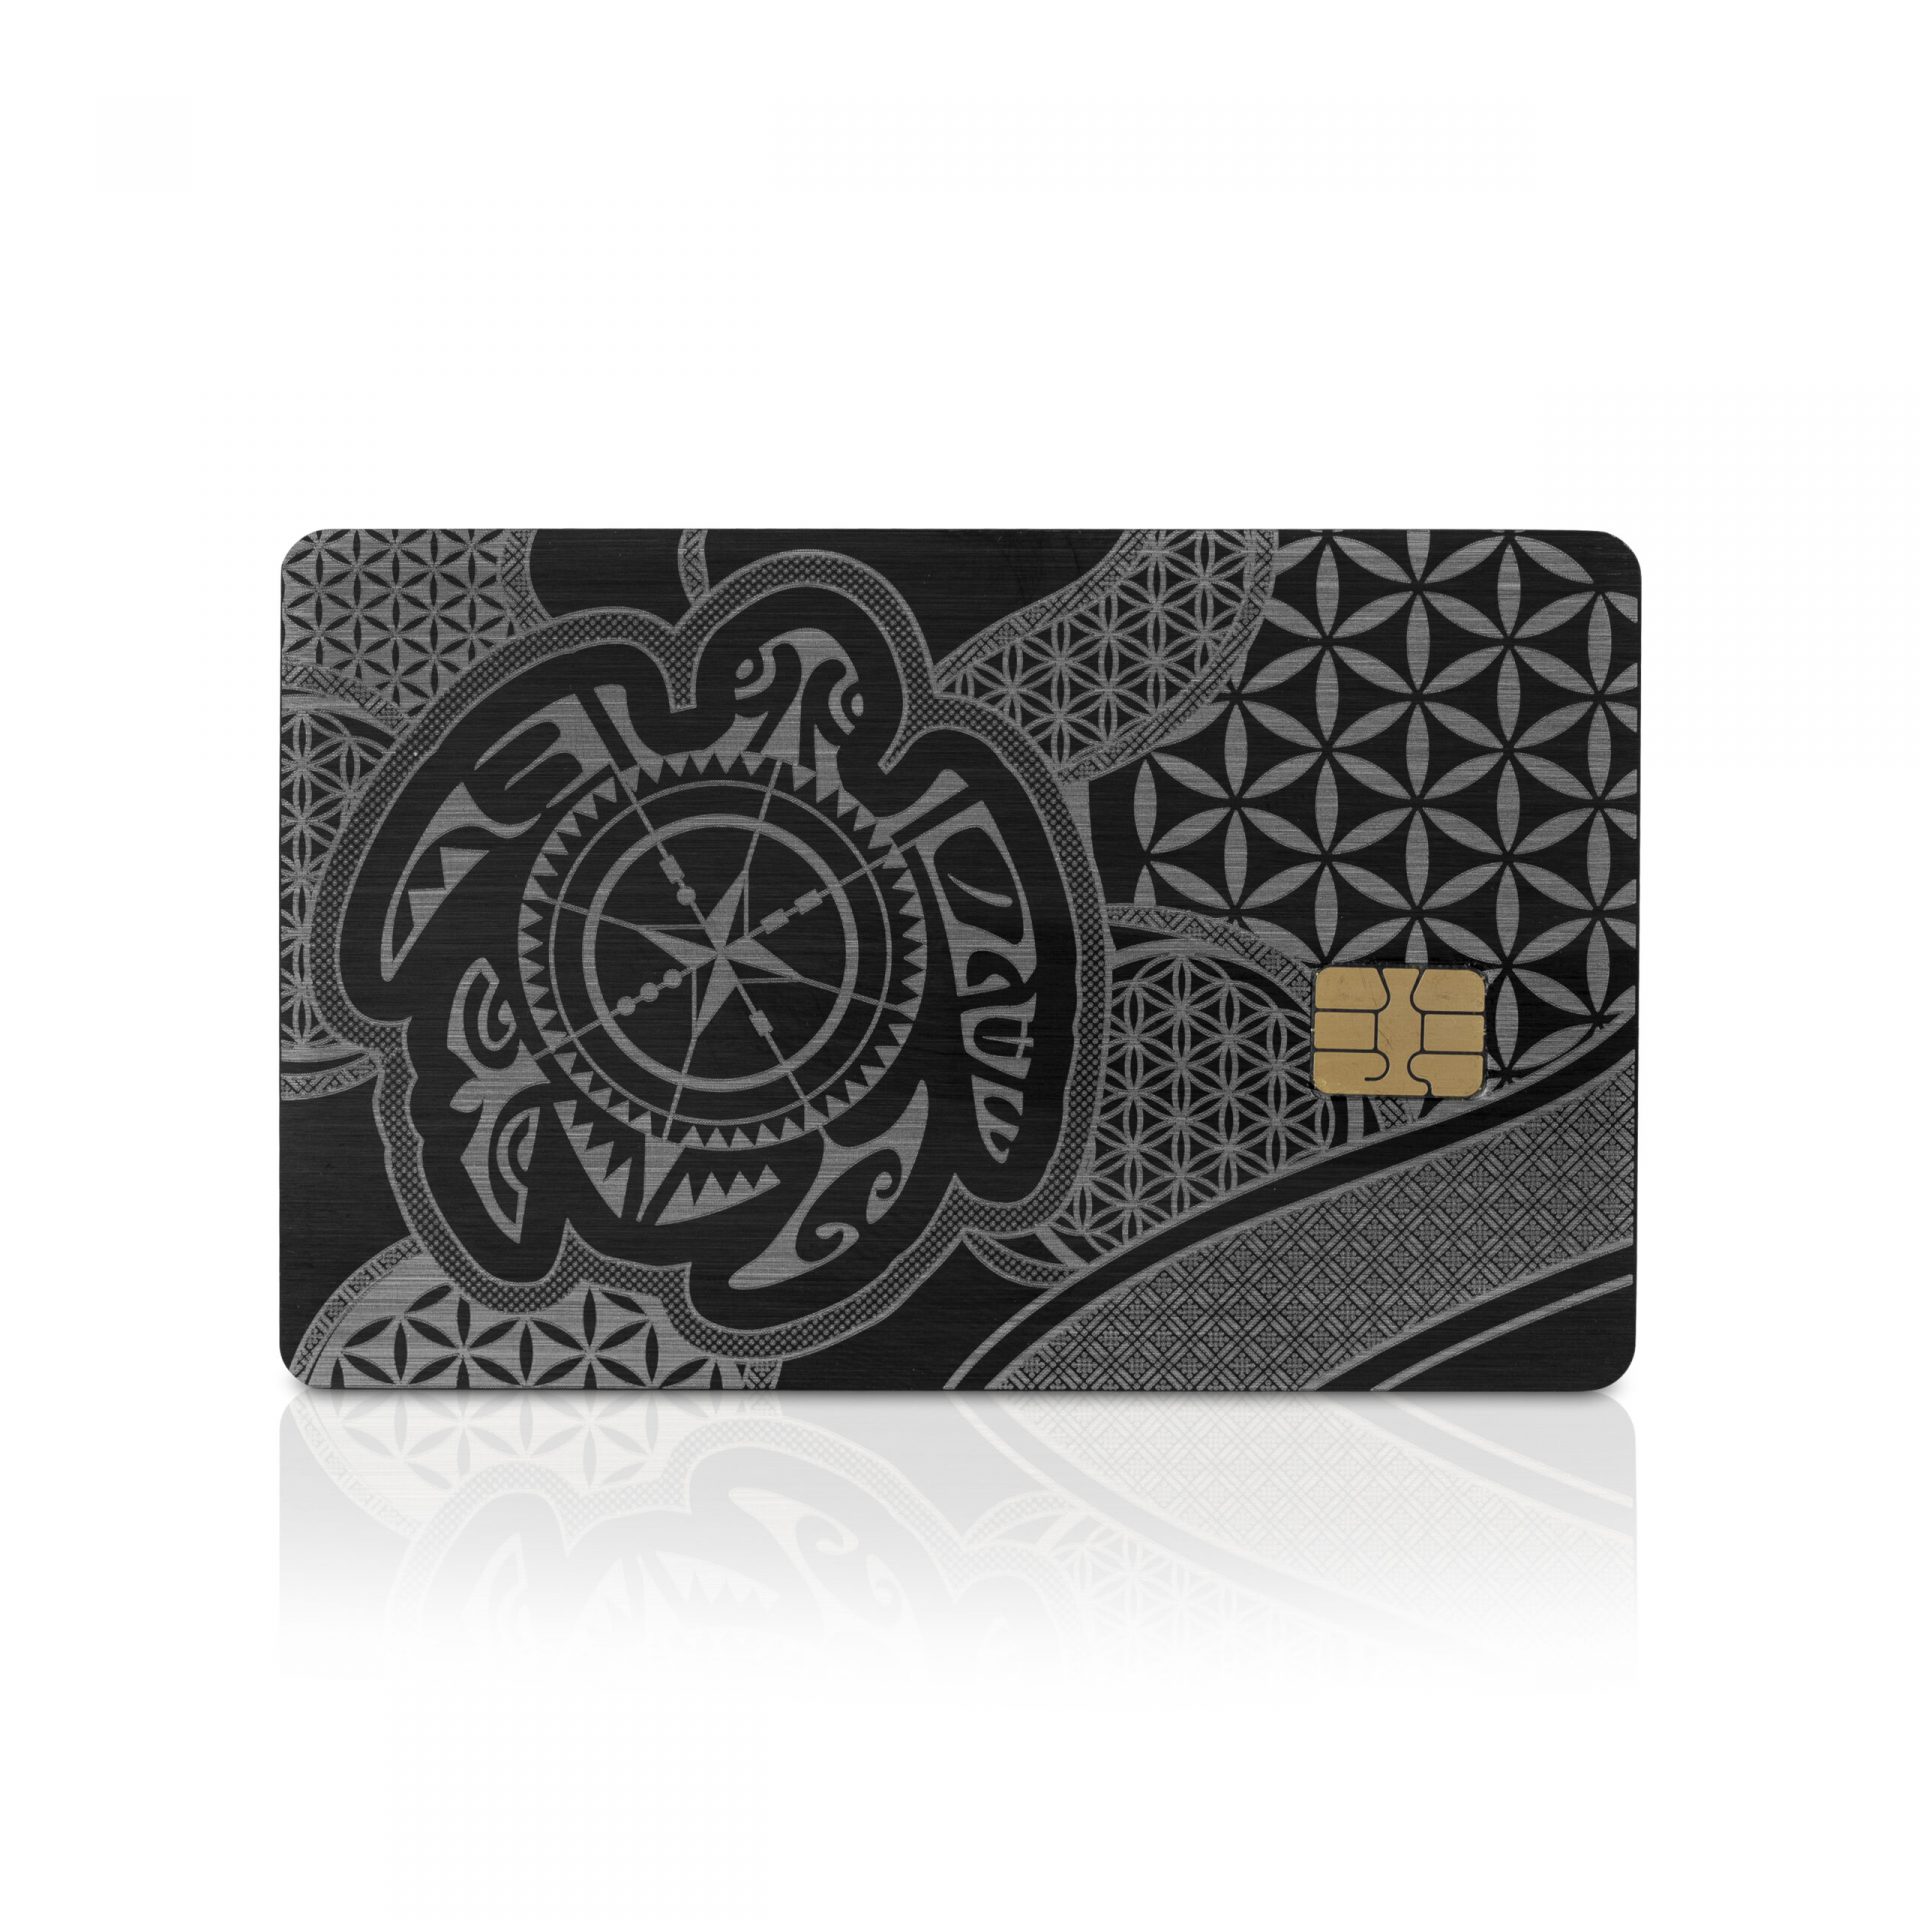 Carbon Co. Skins turns your plastic credit card into a custom-designed  metal one